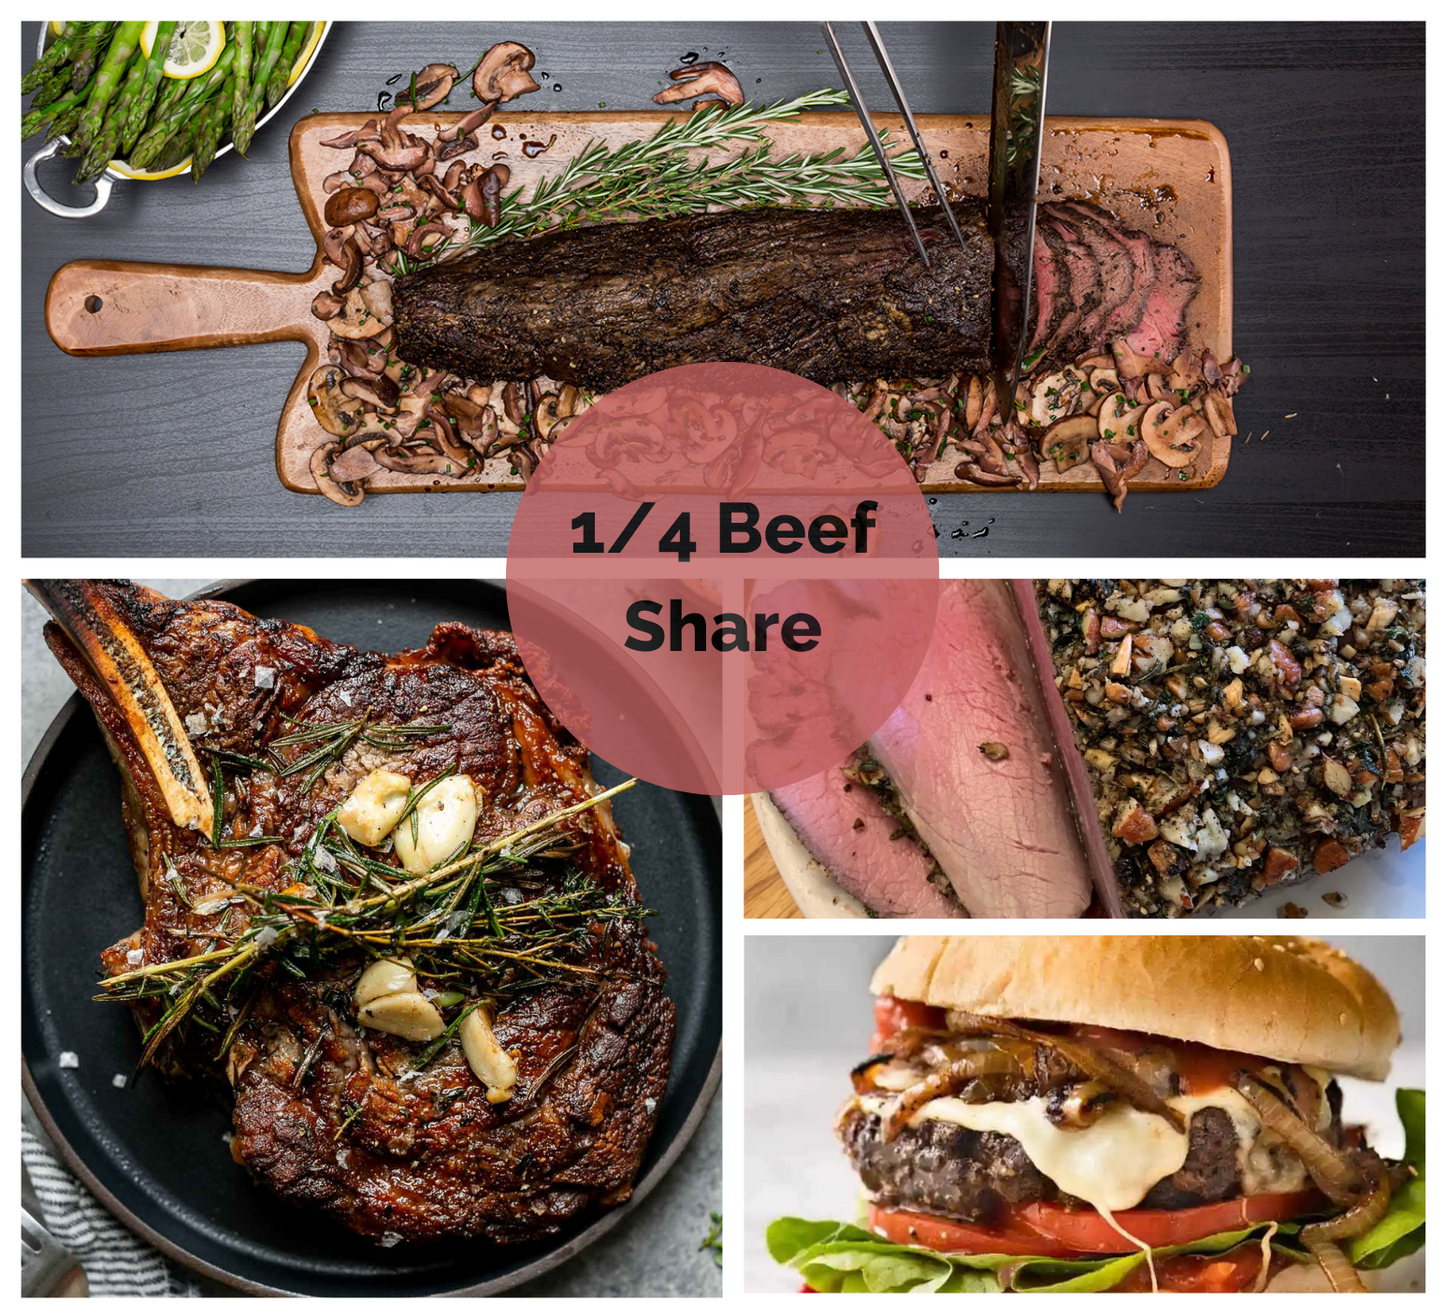 Examples of beef preparation including a grilled ribeye steak, a pecan and herb crusted top round roast, burger, and smoked beef tenderloin being sliced on a cutting board